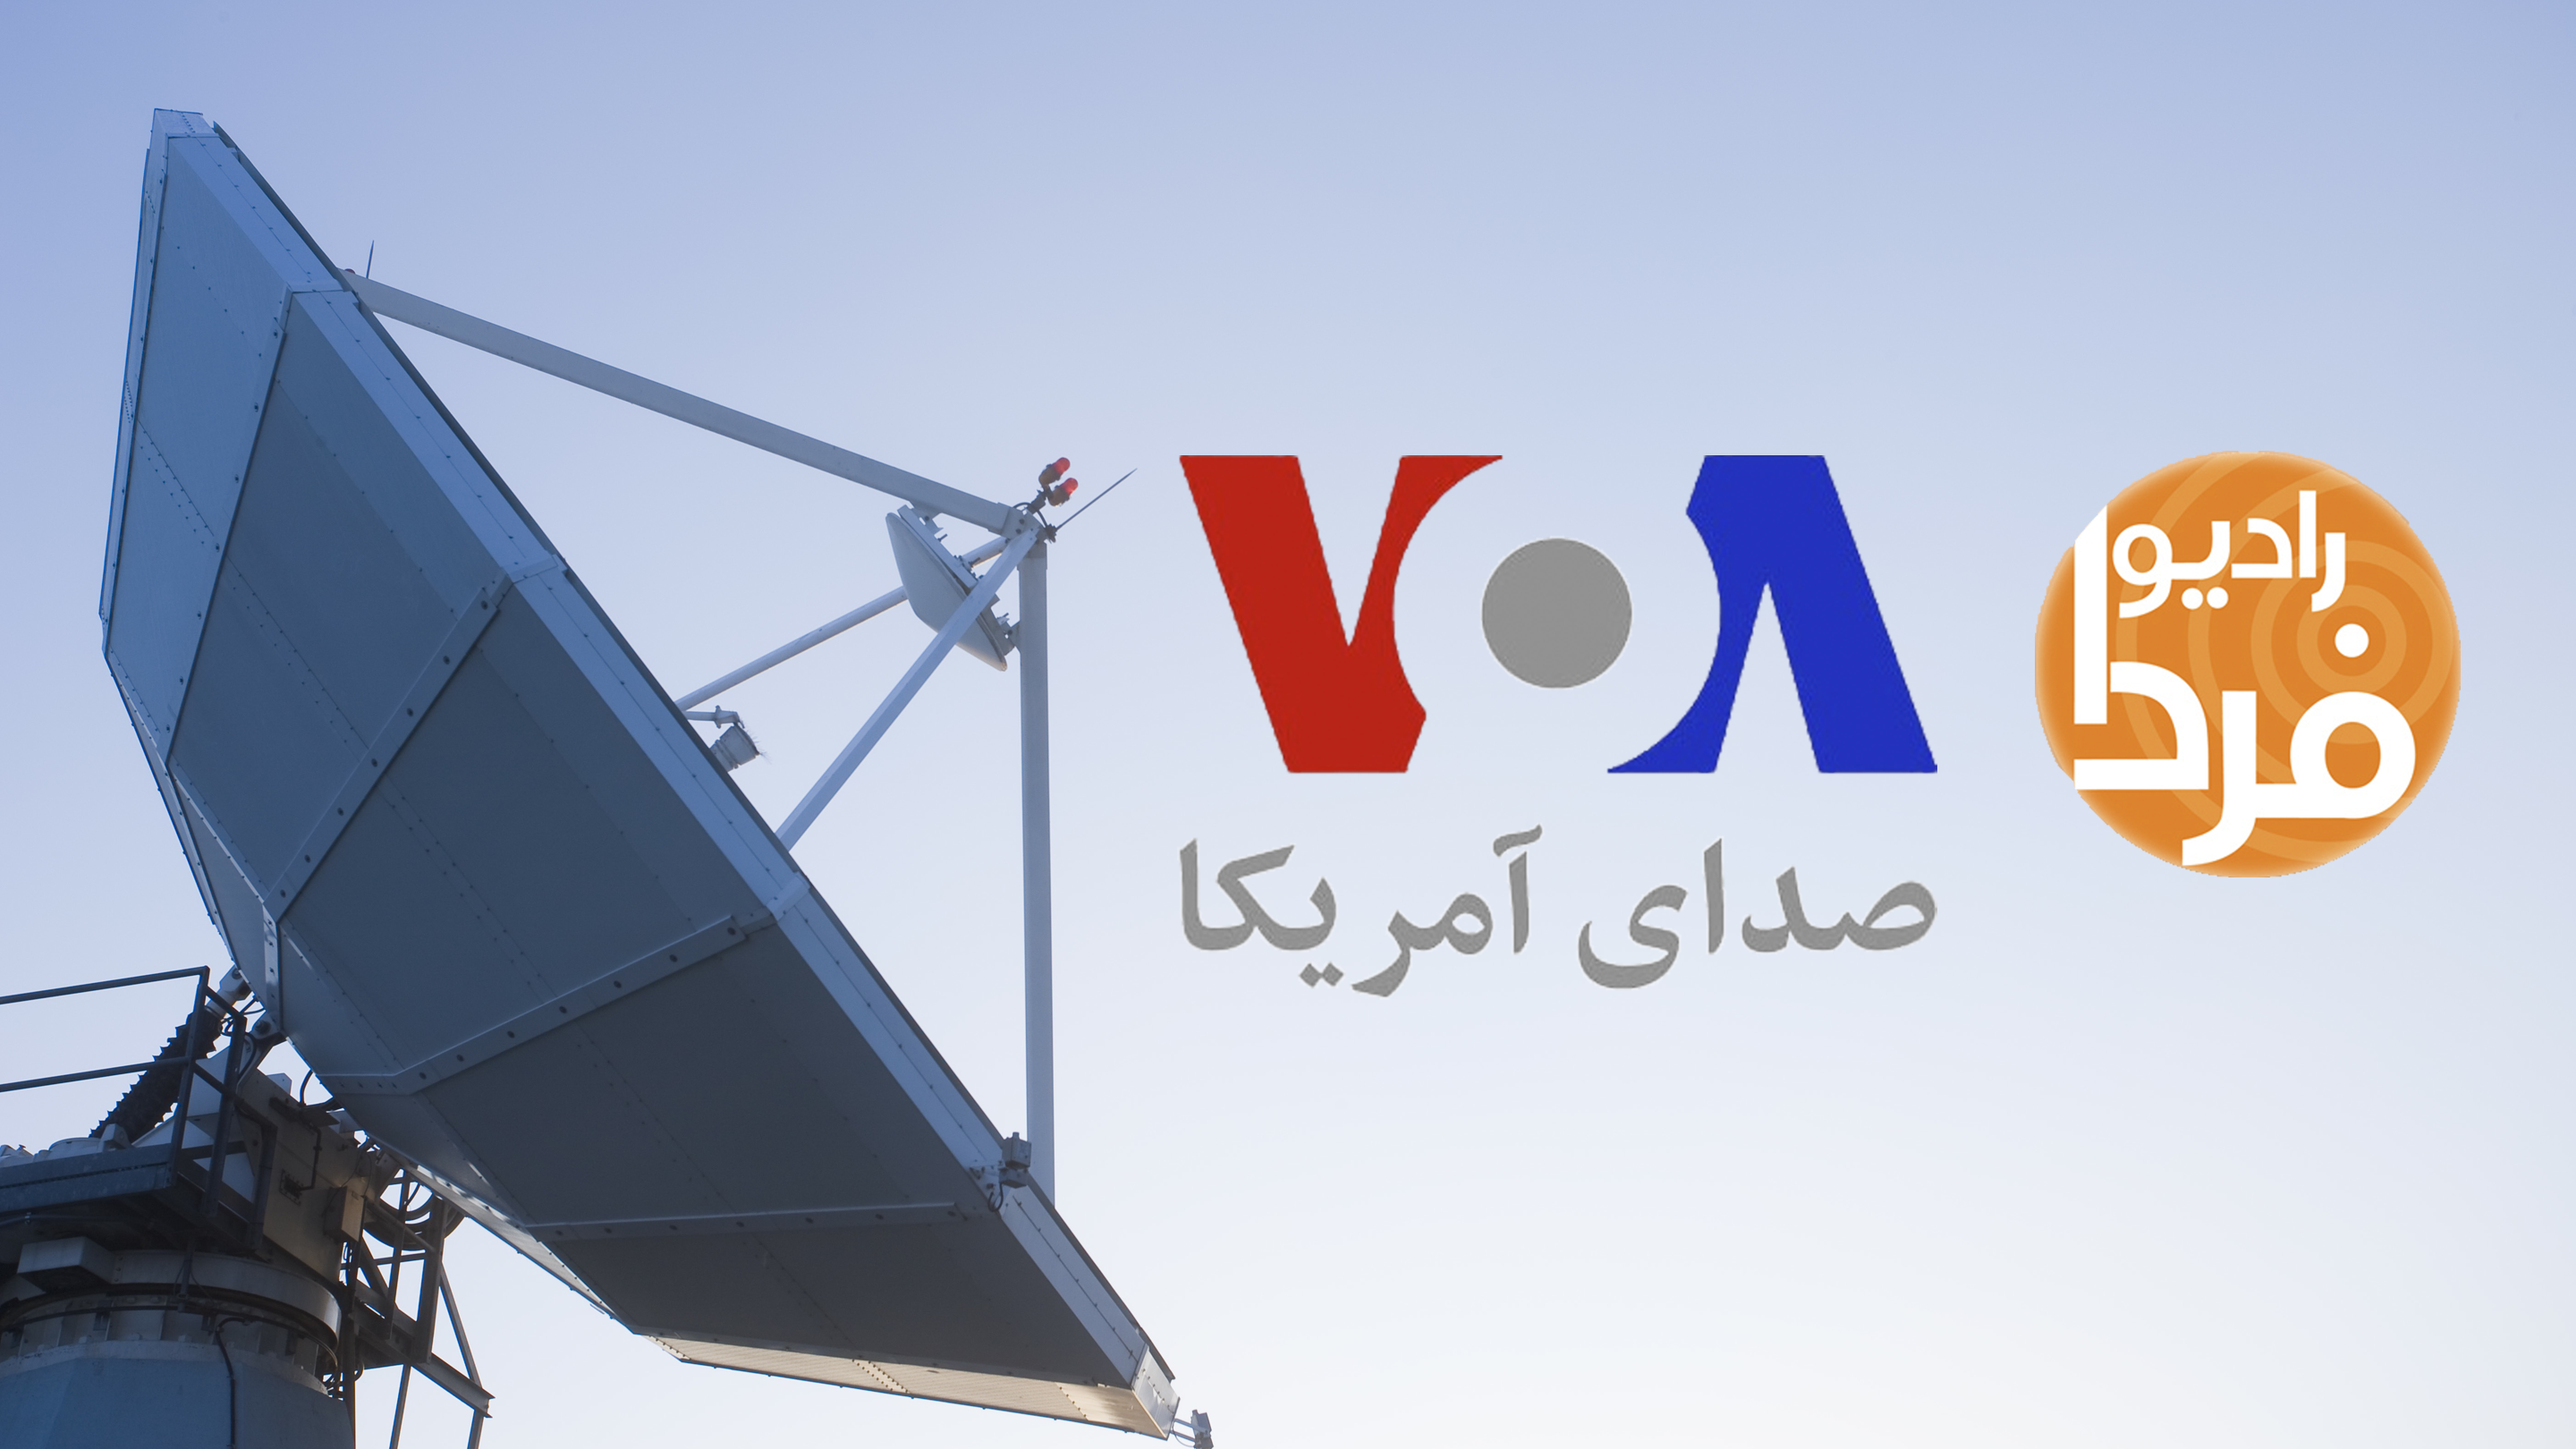 USA: Audiences in Iran Get New Breakfast Shows on VOA Satellite